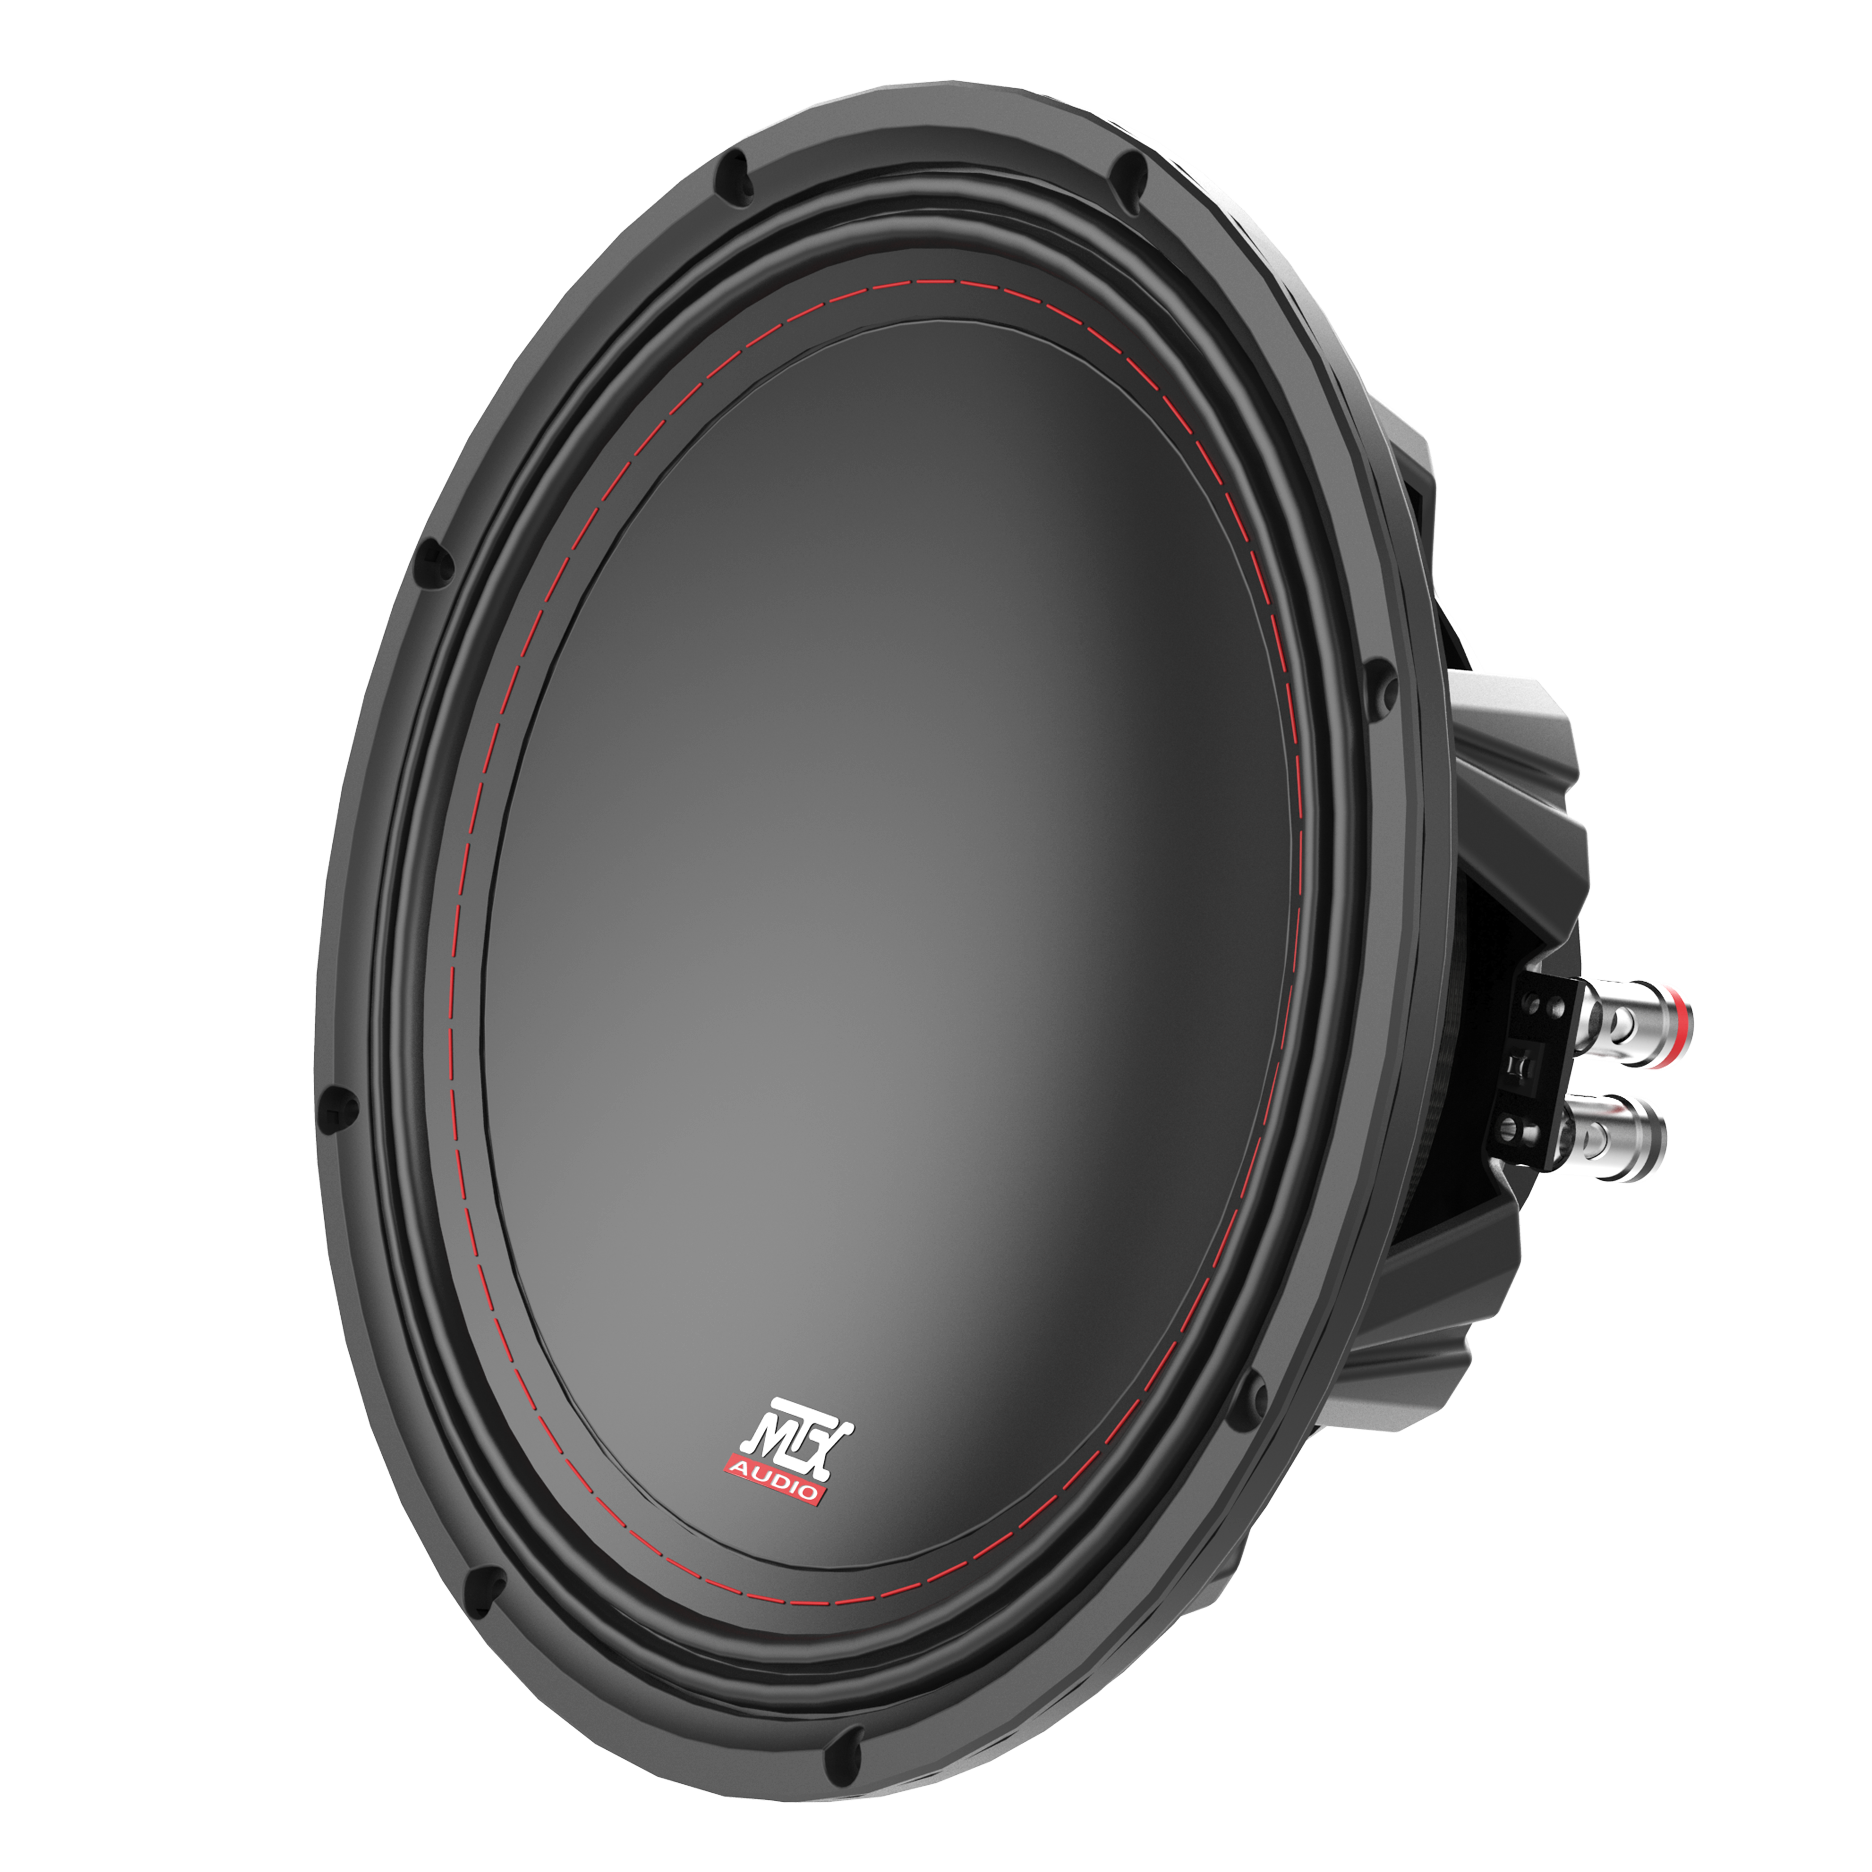 stivhed yderligere Vred 35 Series 10" 2Ω Single Voice Coil Subwoofer | MTX Audio - Serious About  Sound®